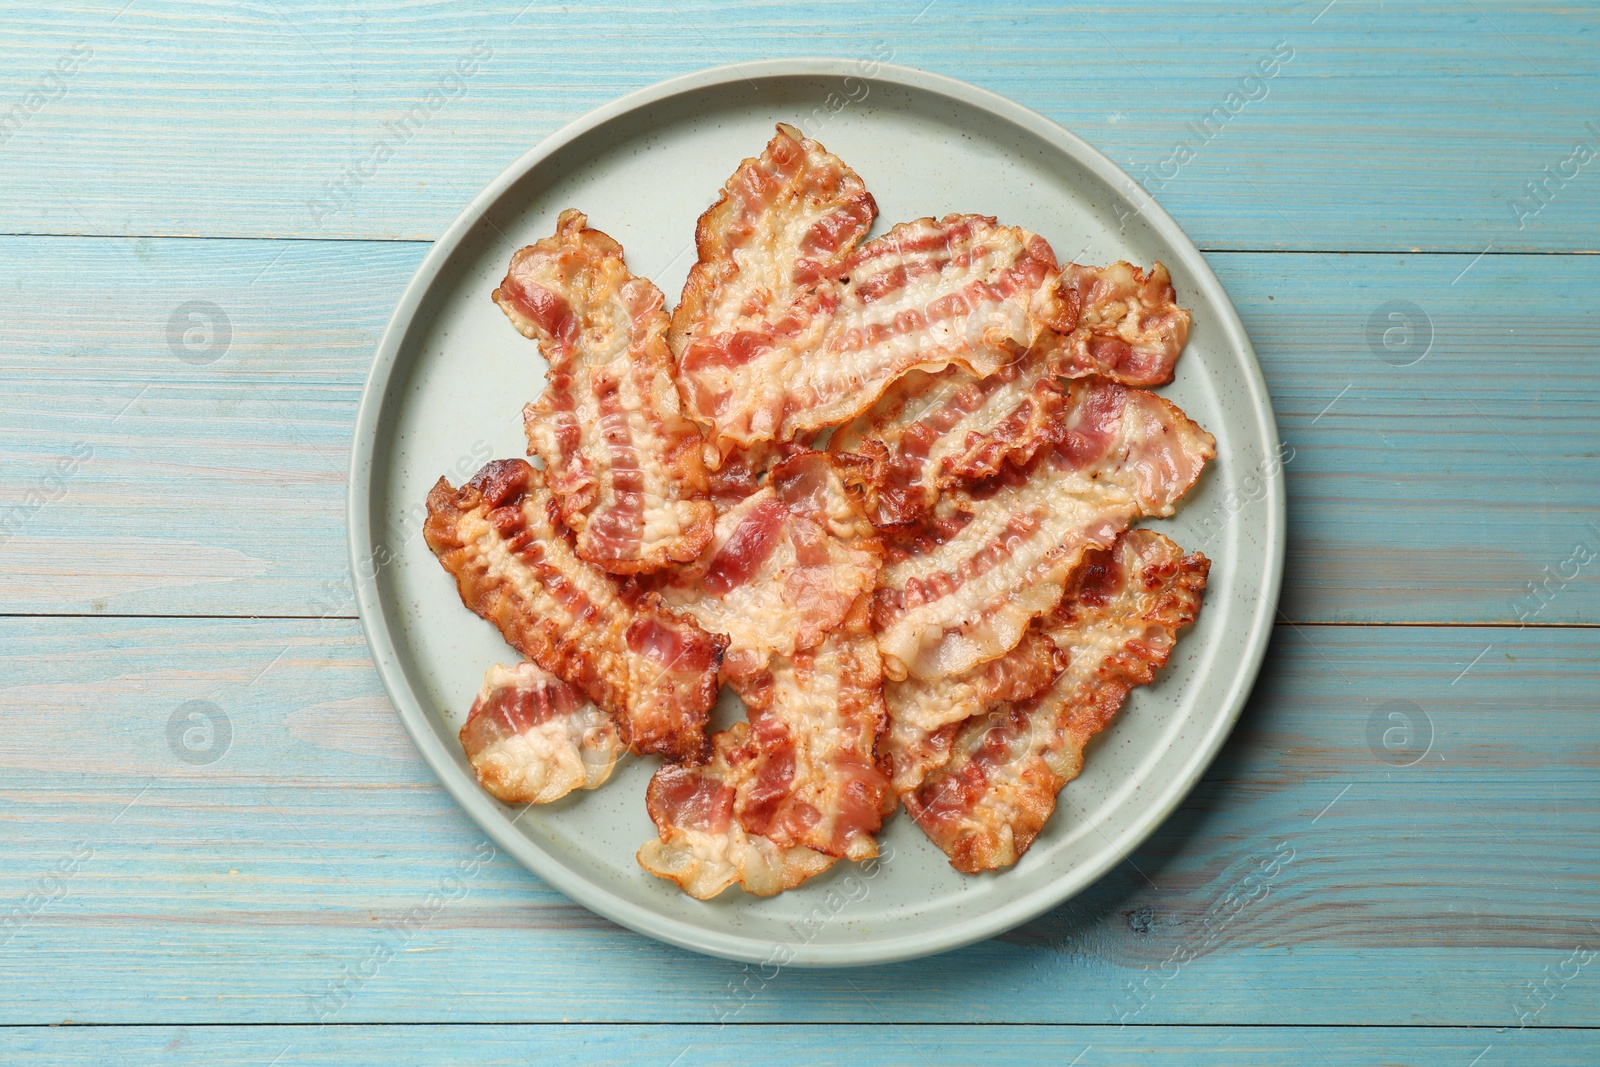 Photo of Delicious fried bacon slices on blue wooden table, top view